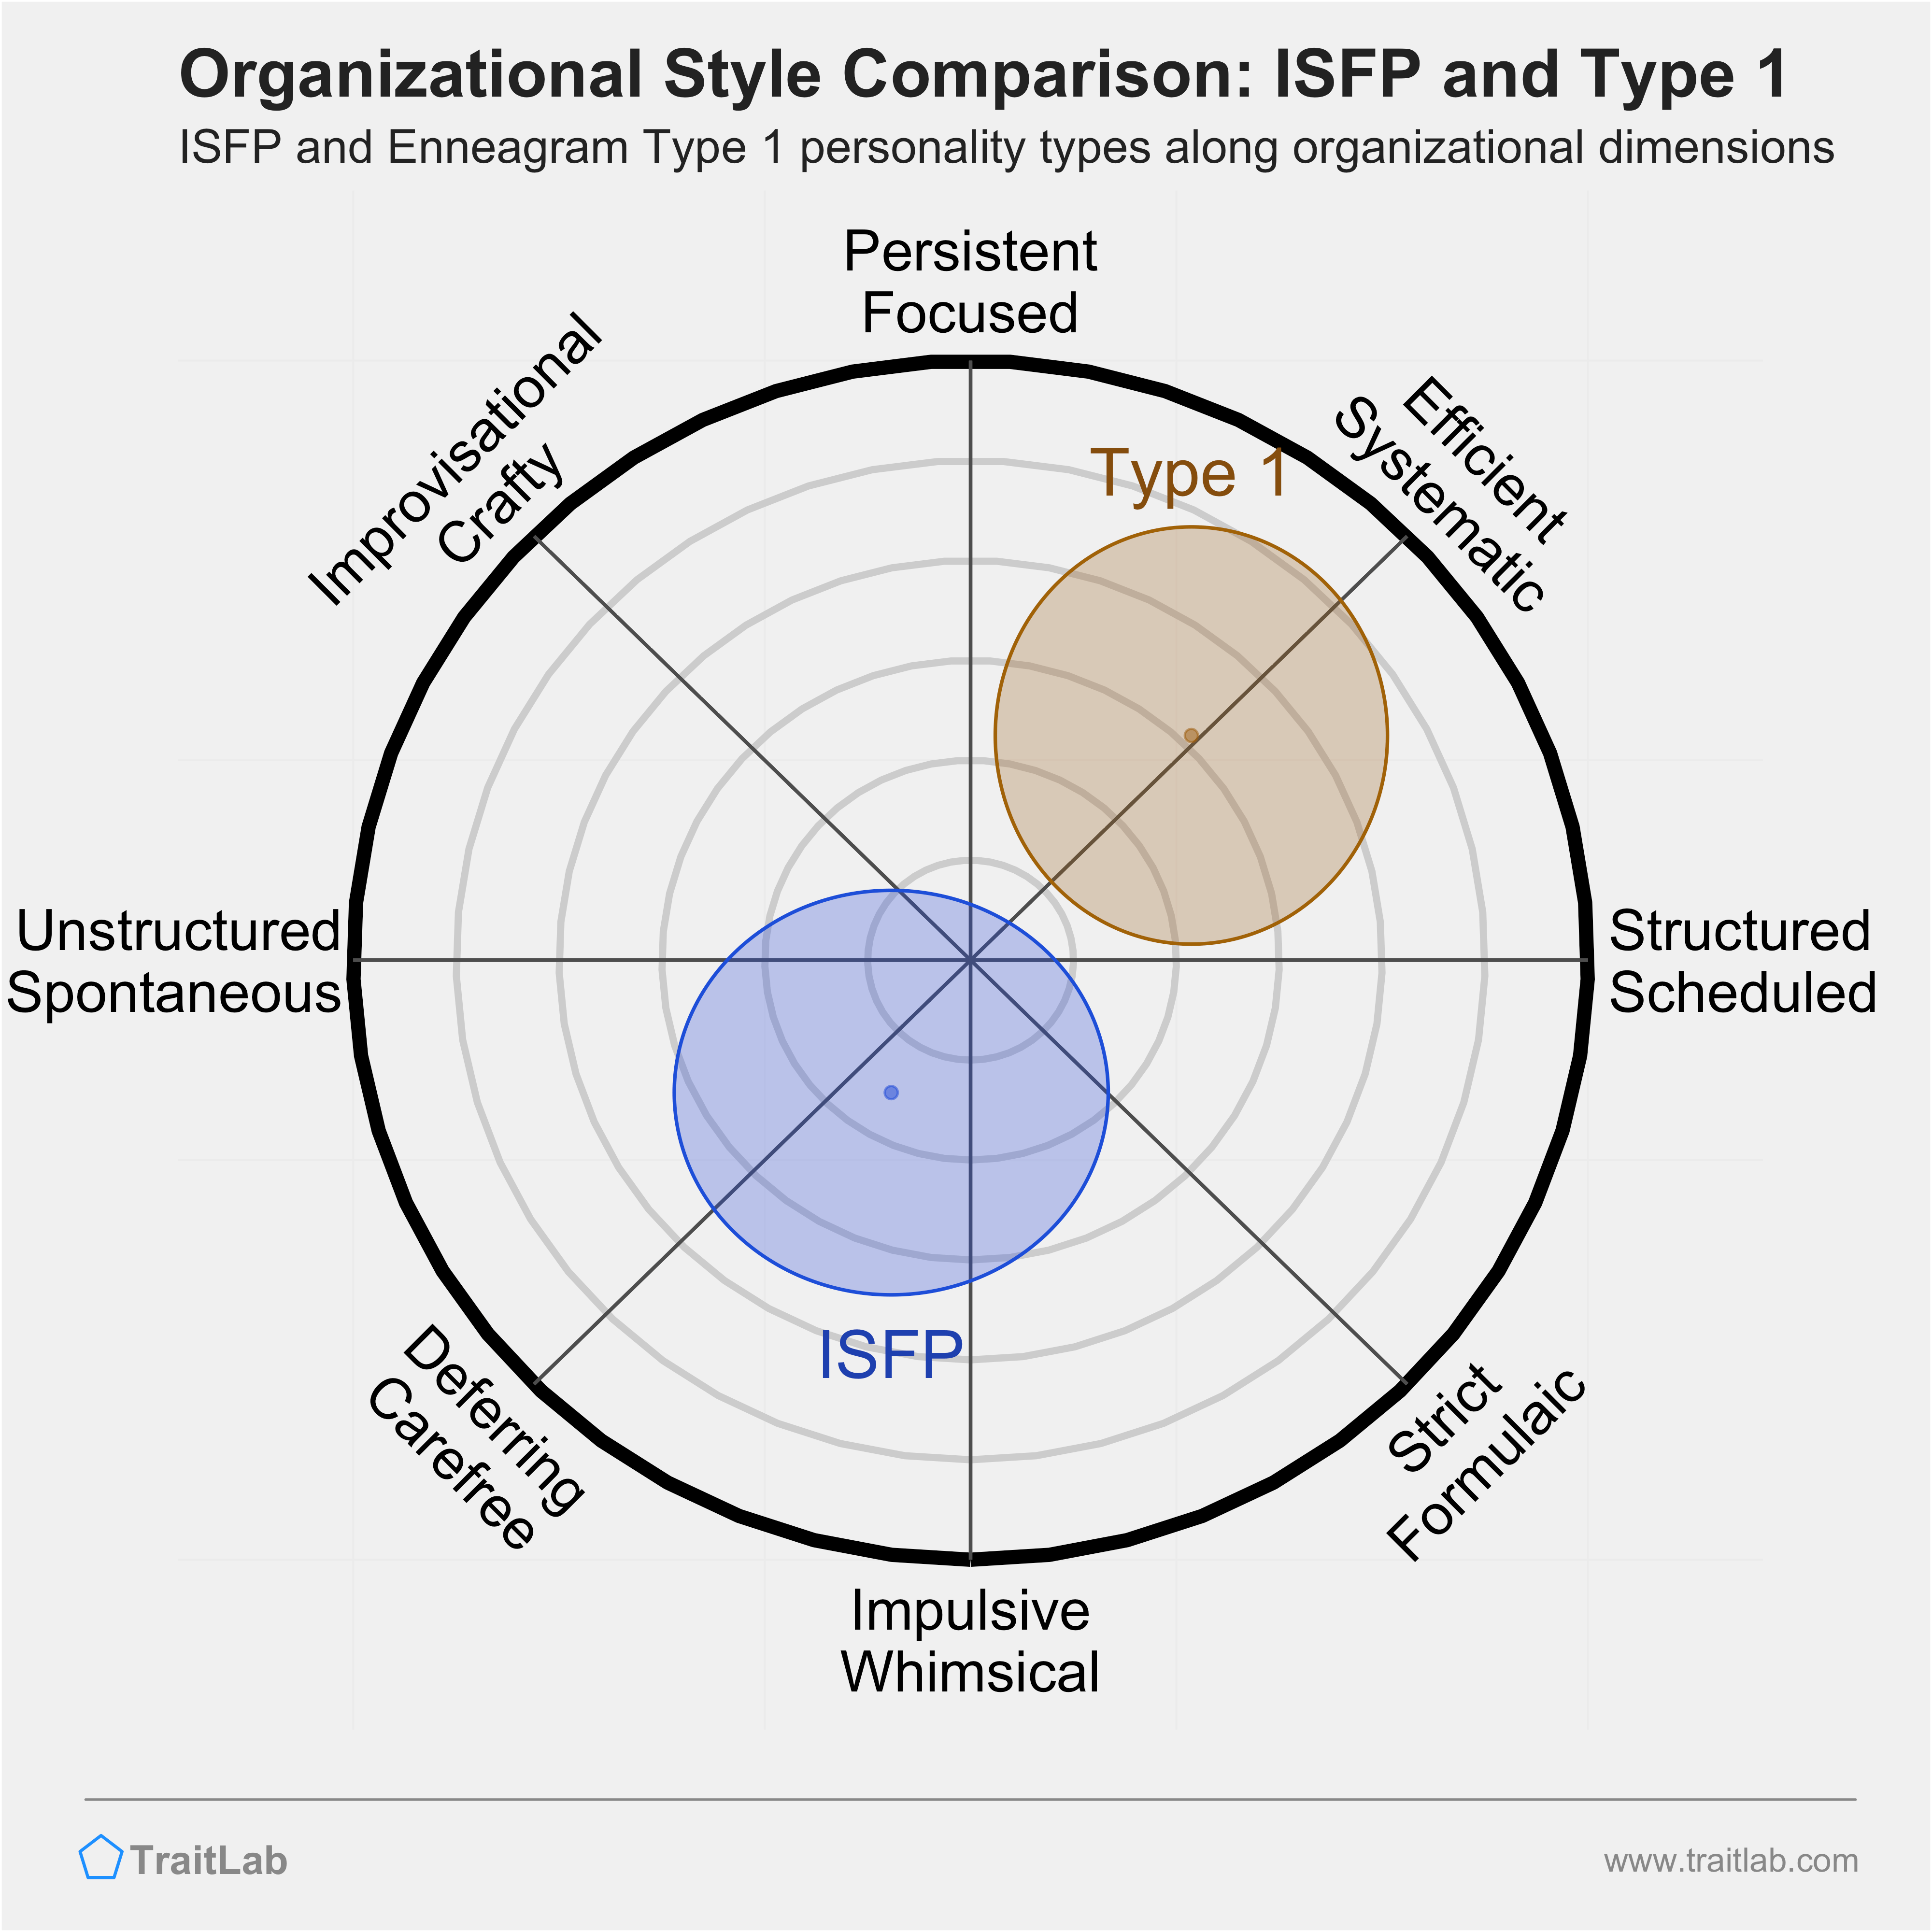 ISFP and Type 1 comparison across organizational dimensions